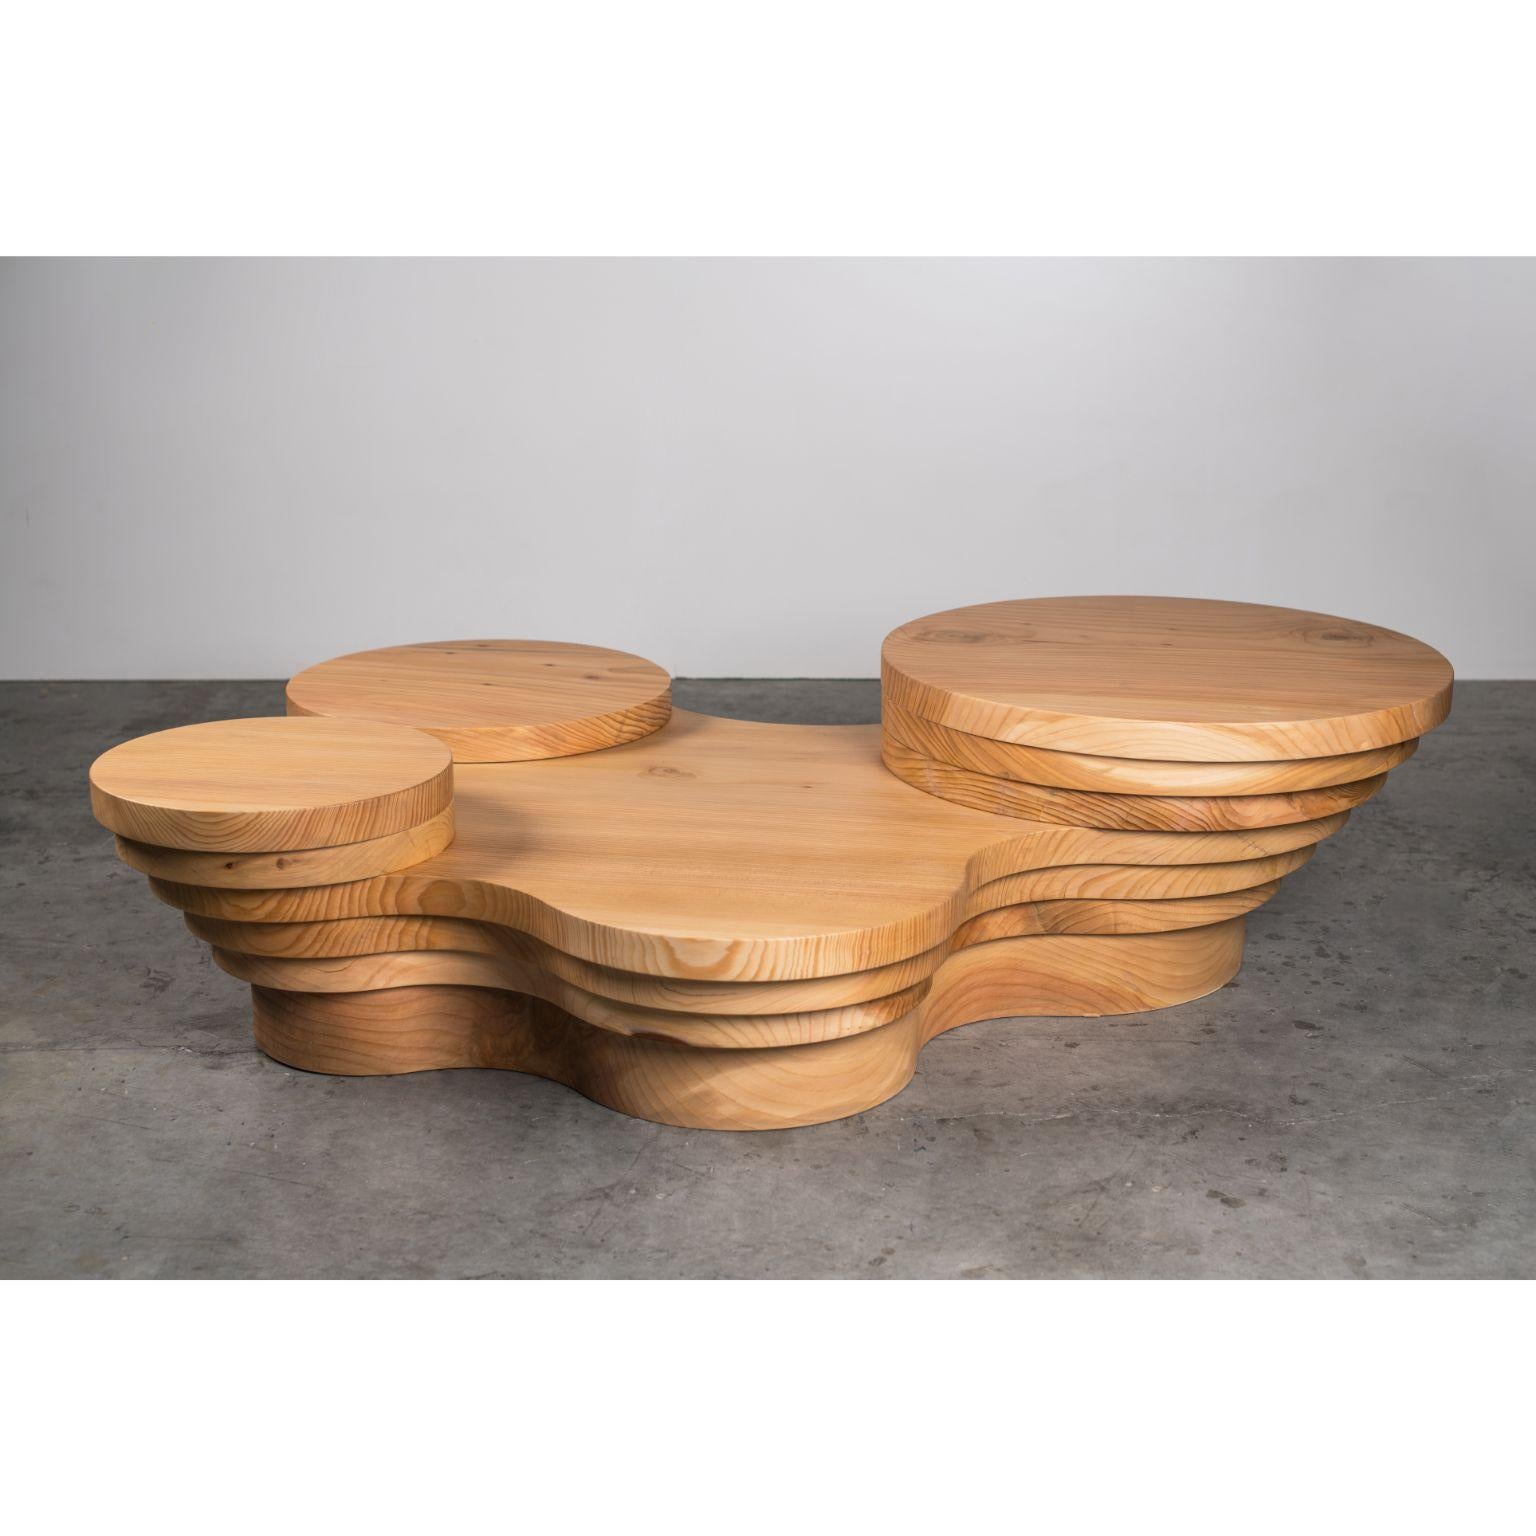 Slice me up cedar wood sculptural coffee table by Pietro Franceschini
Sold exclusively by Galerie Philia
Dimensions: W 160 x L 120 x H 36 cm
Materials: Solid cedar wood, Semi-glossy

Made to order dimensions can be ordered.

Pietro Franceschini is